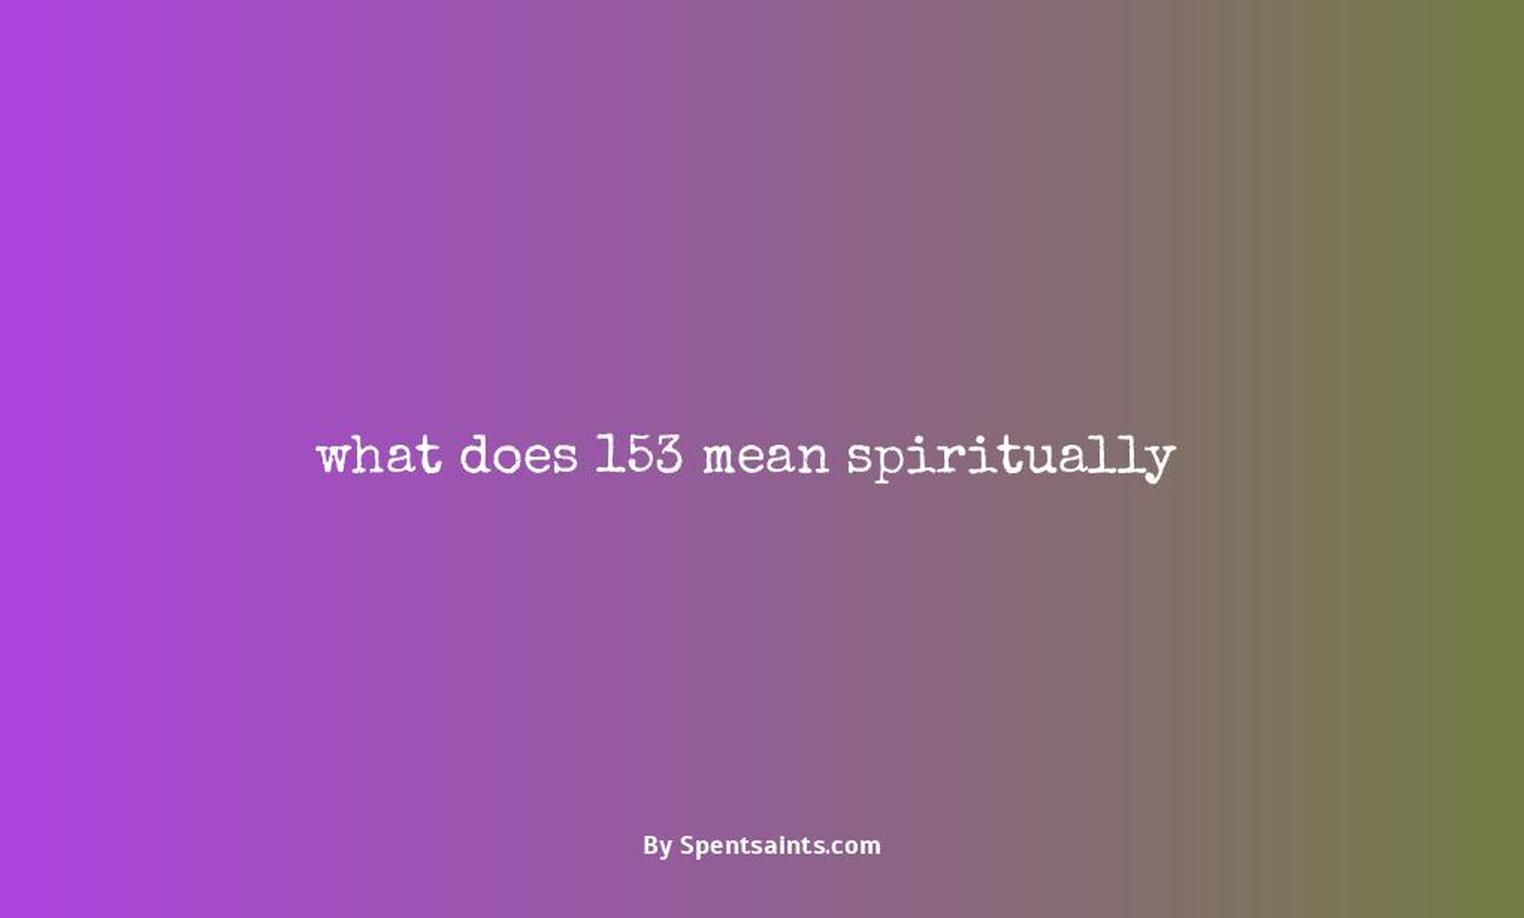 what does 153 mean spiritually